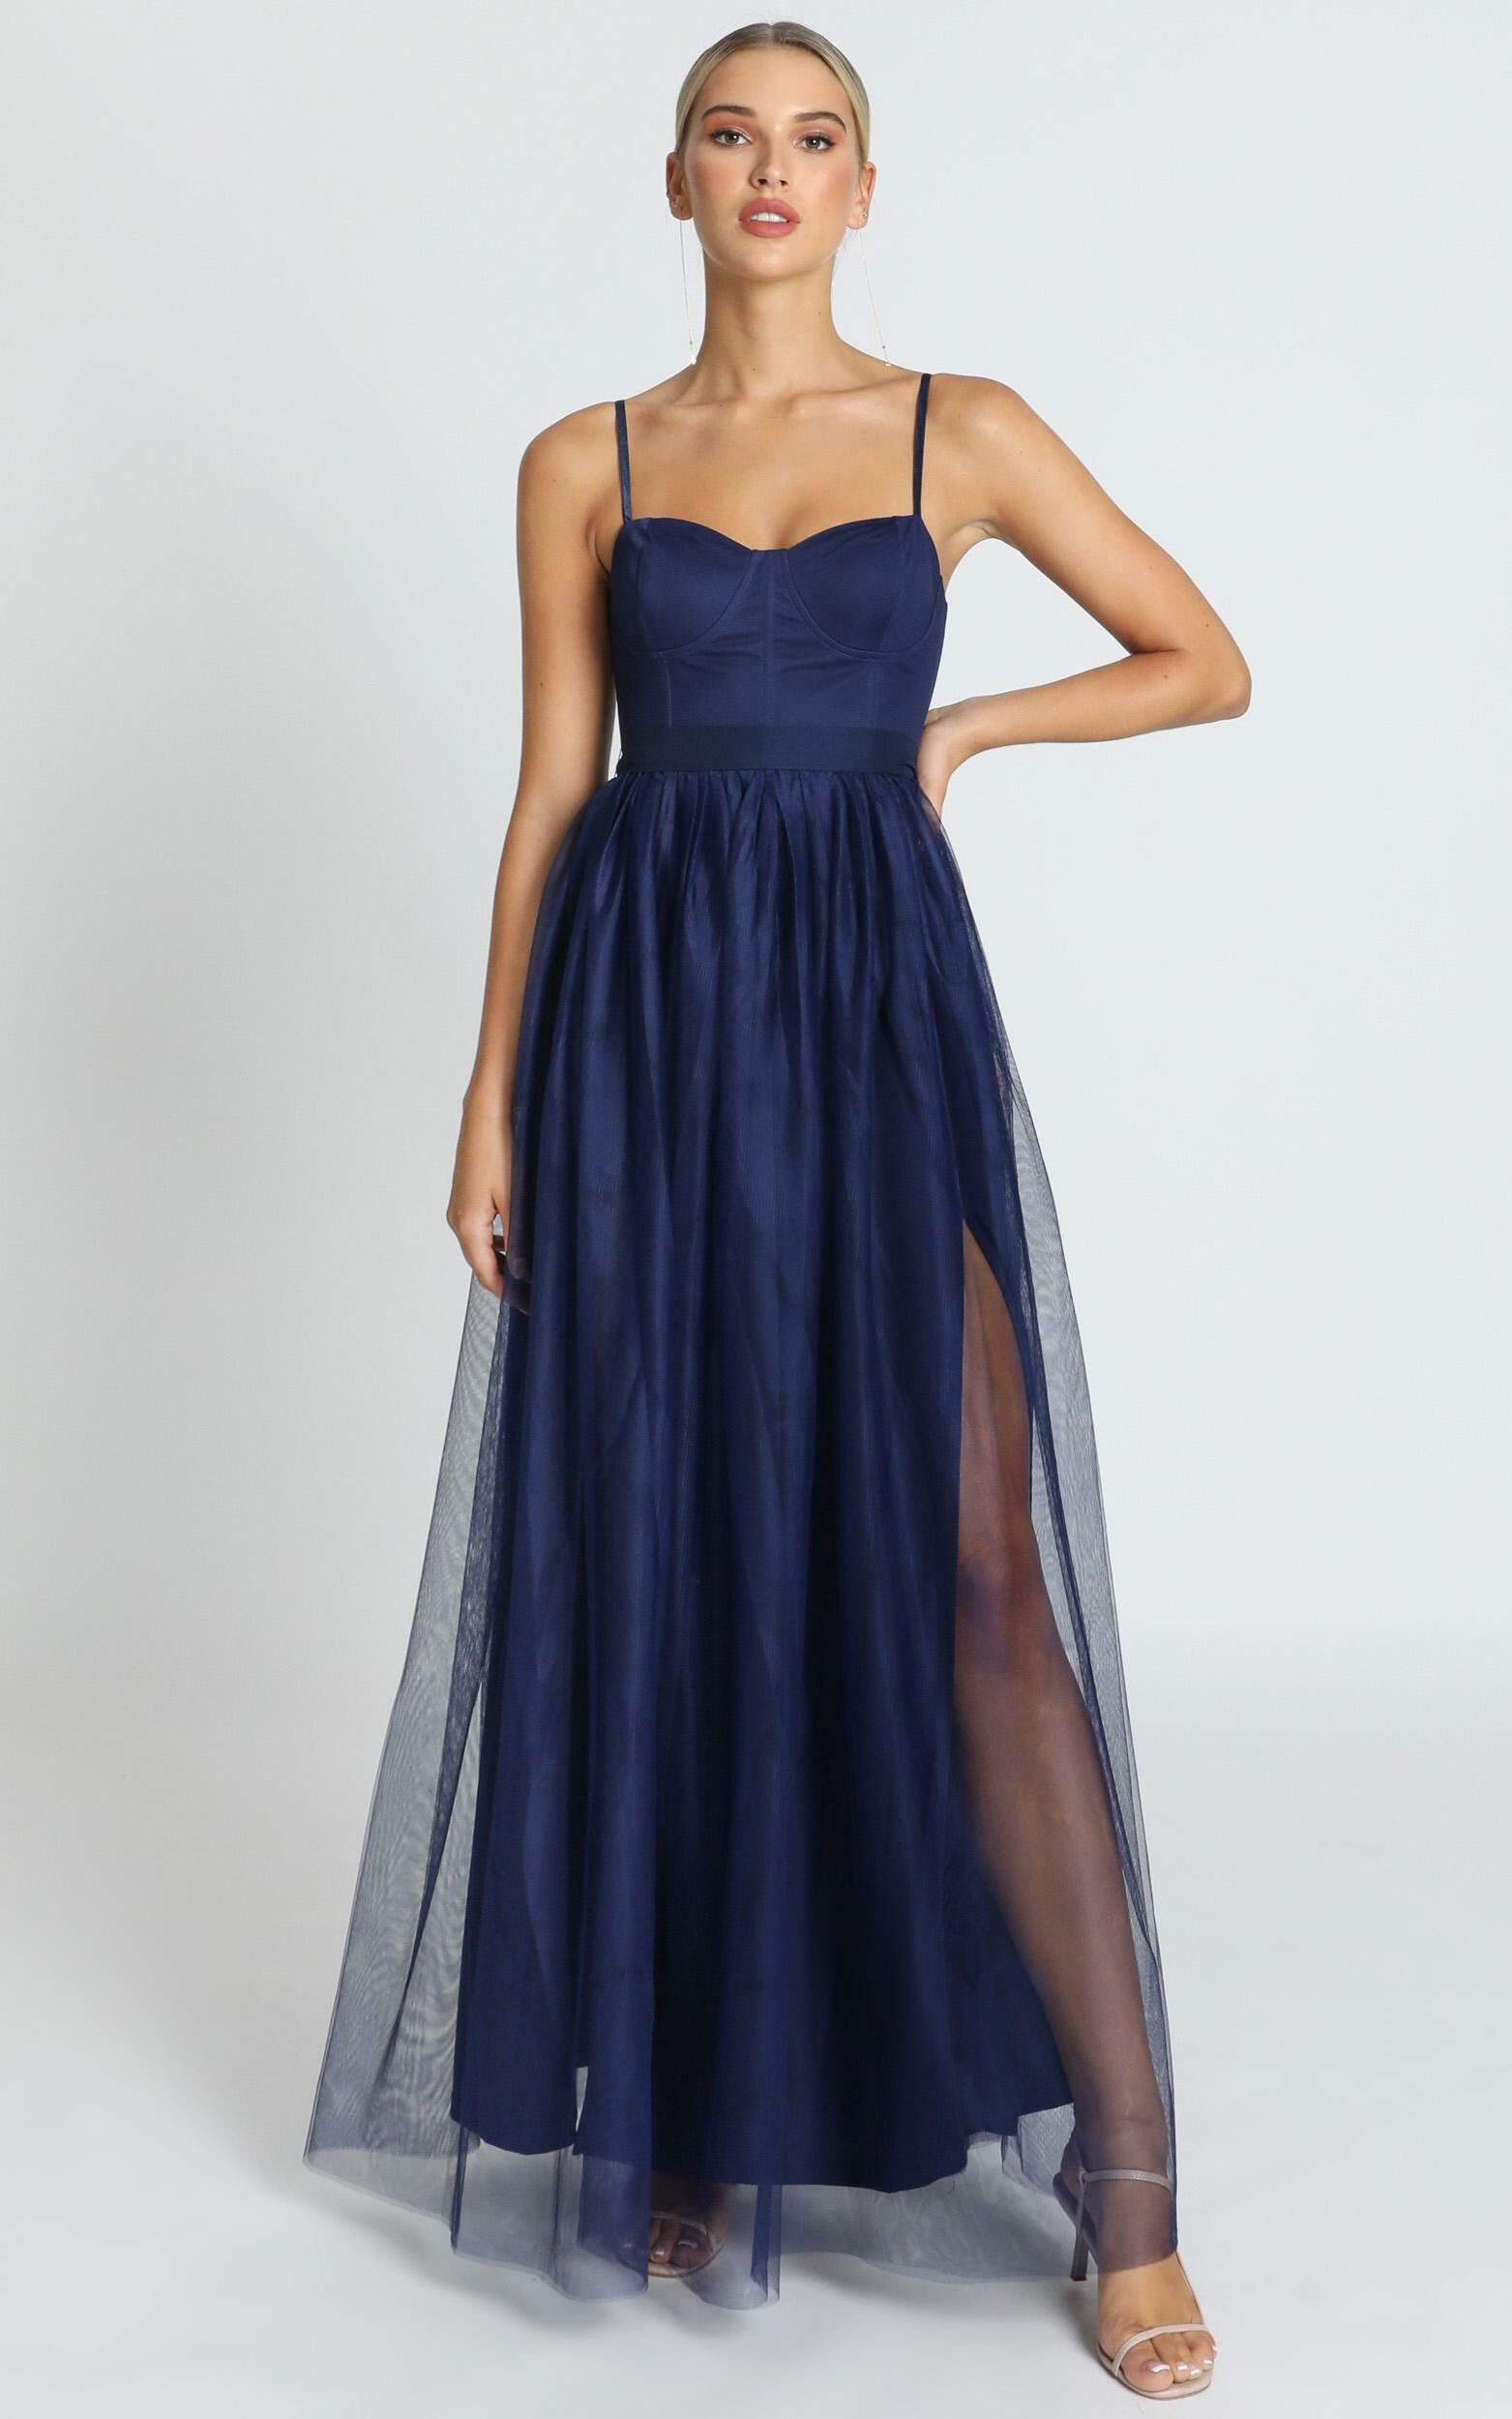 At The Altar Bodice Maxi Dress in Navy - 04, NVY4